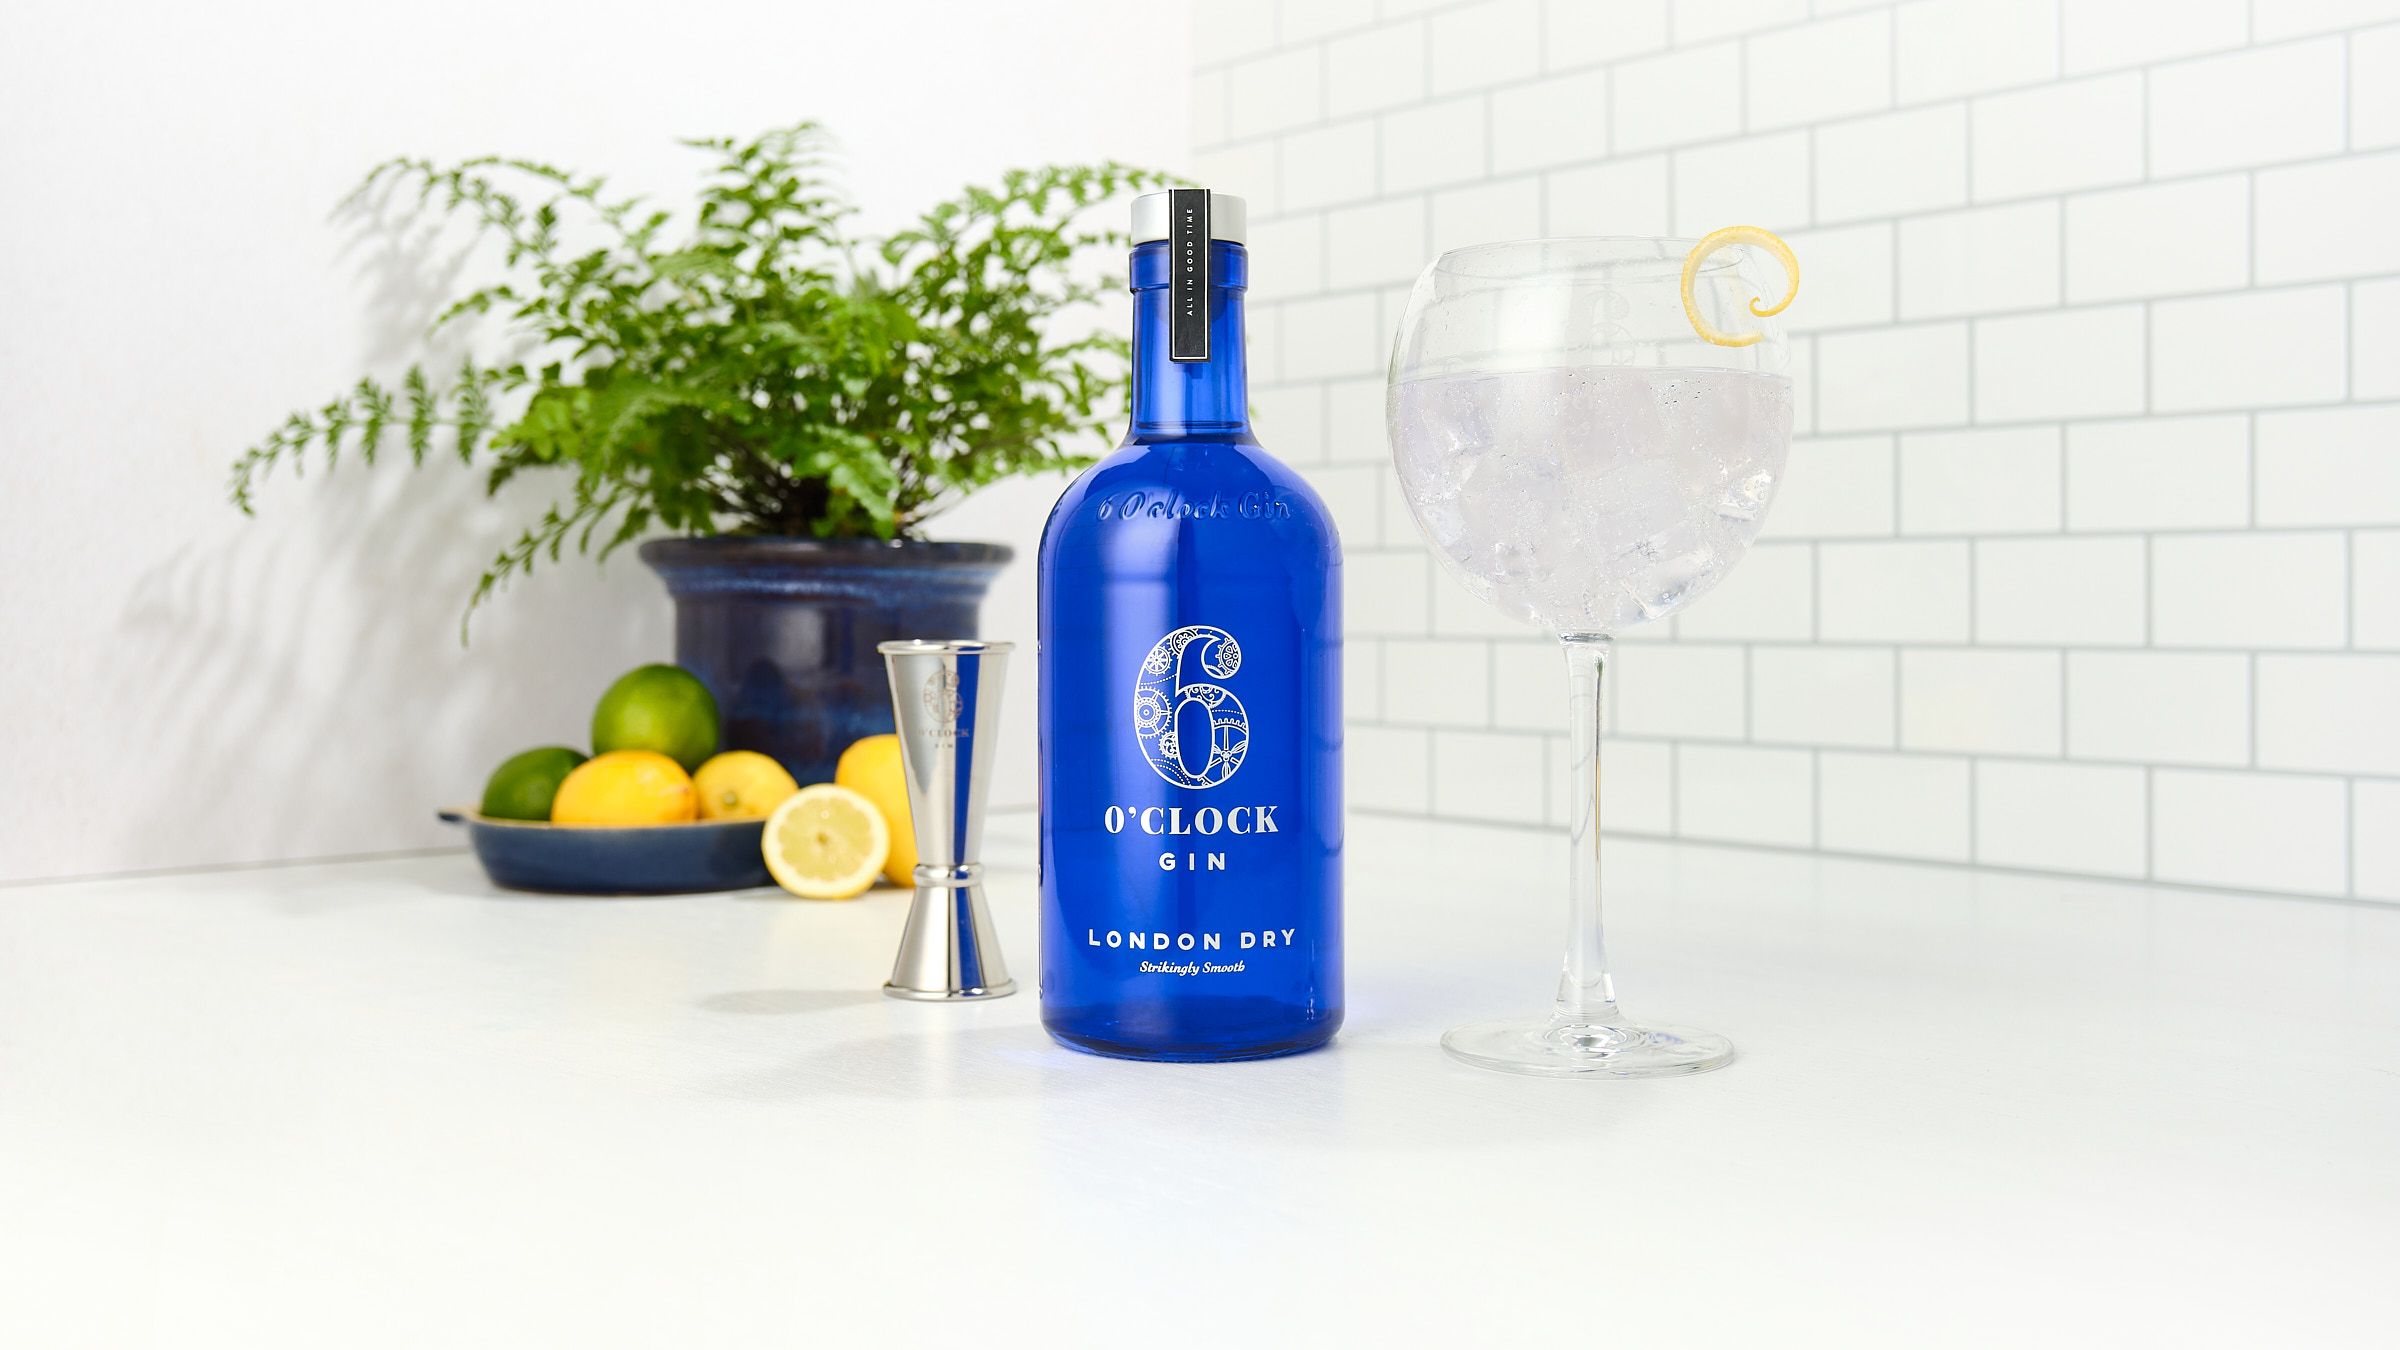 Why now is the time for 6 O’Clock gin to make its mark